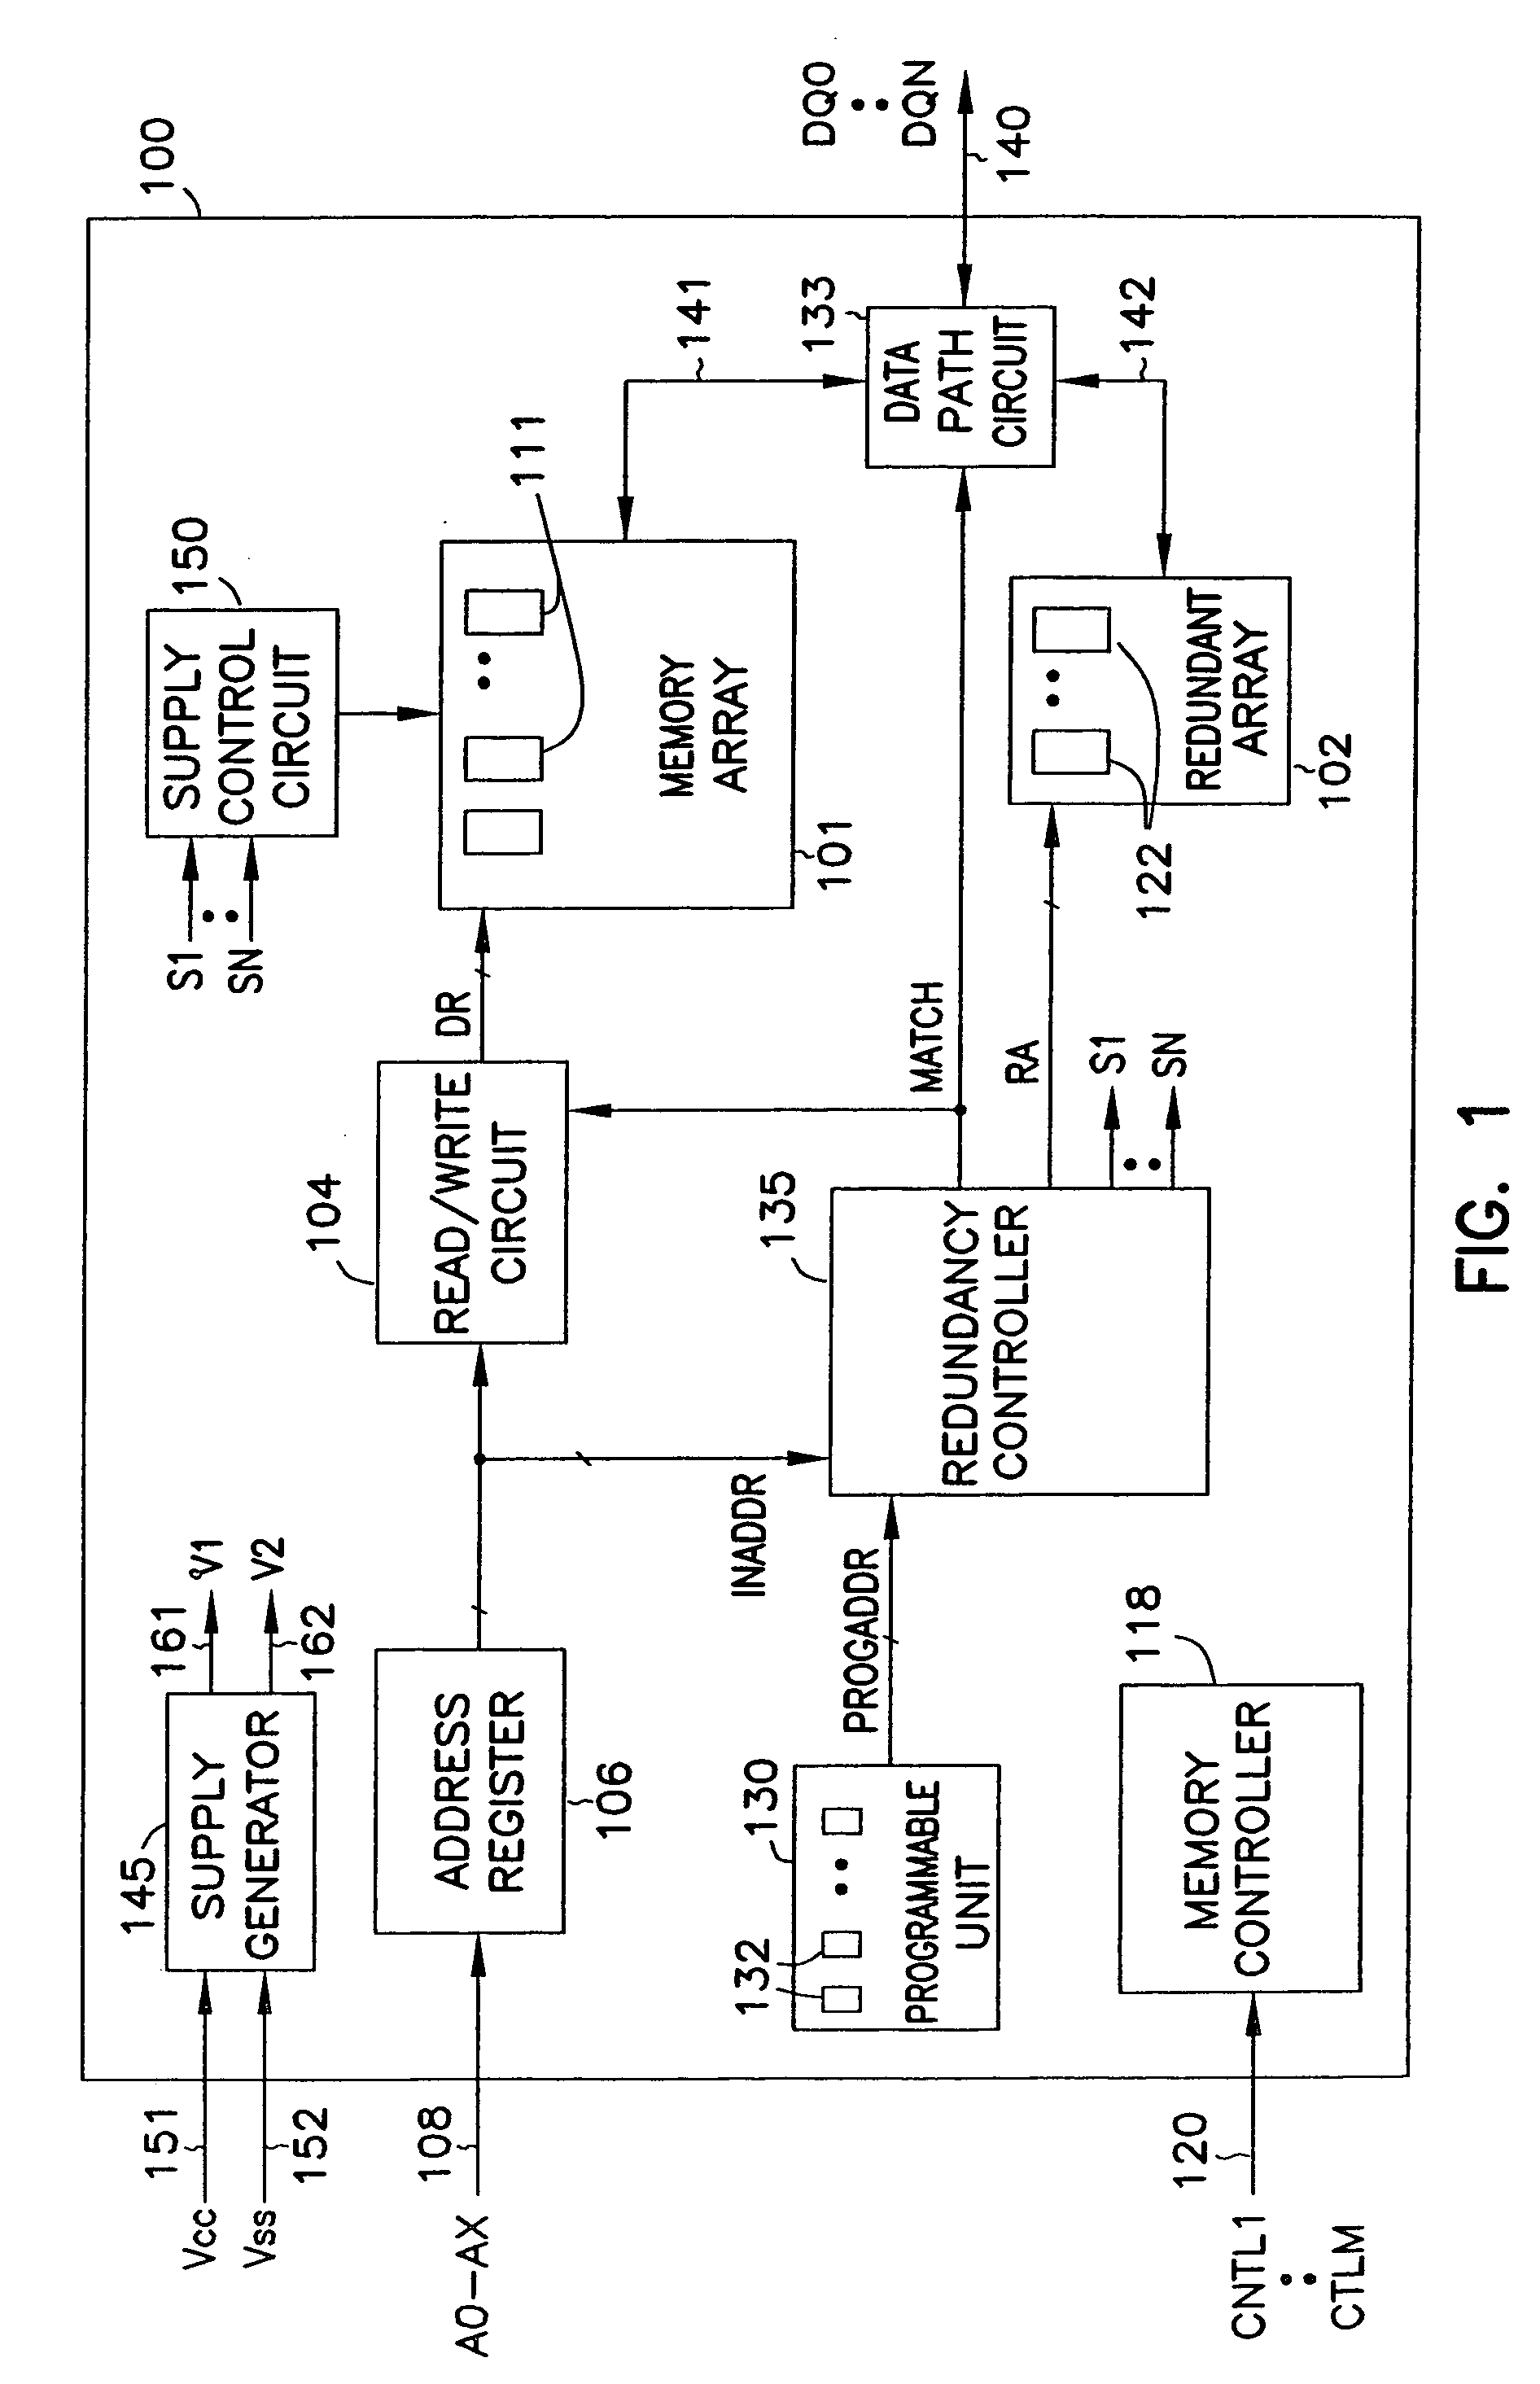 Circuits and methods for repairing defects in memory devices